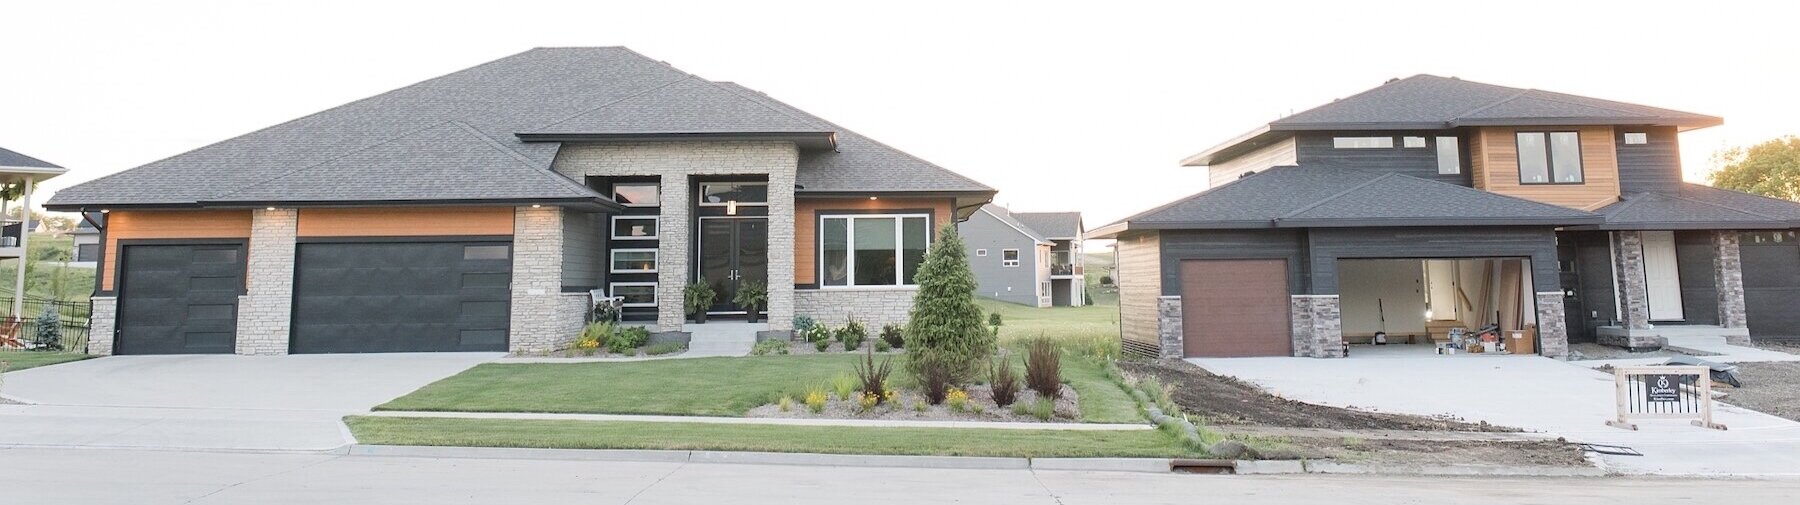  landscaping-des-moines-waukee-new-construction 